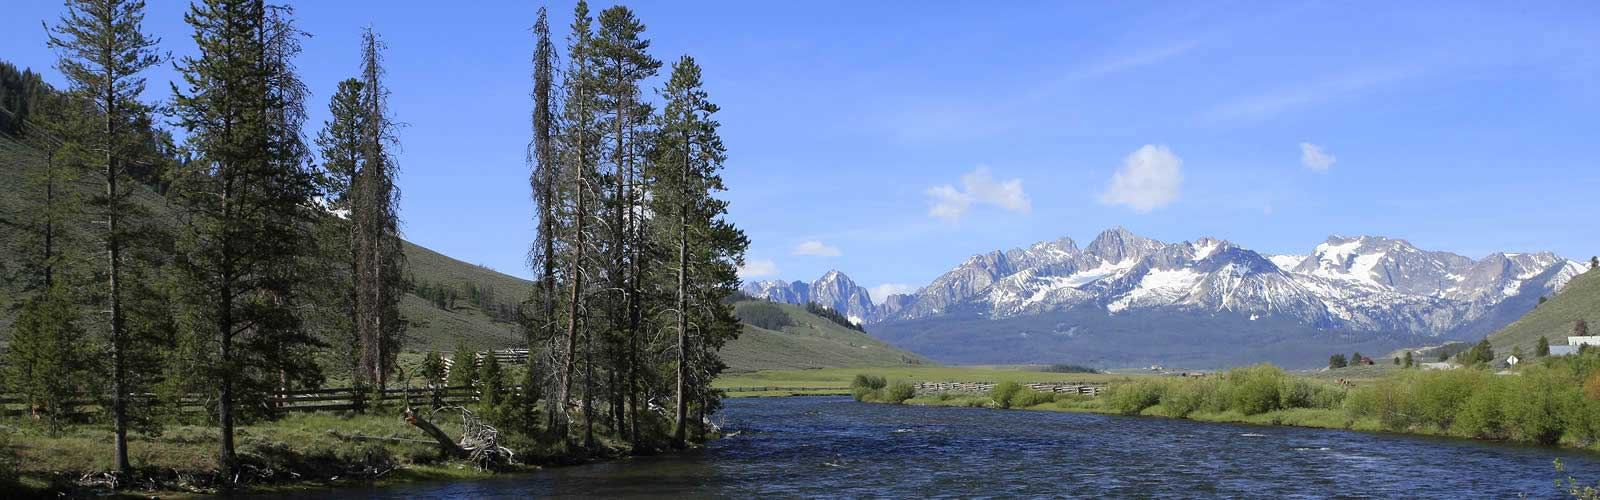 The salmon river with the sawtooth mountains in the background